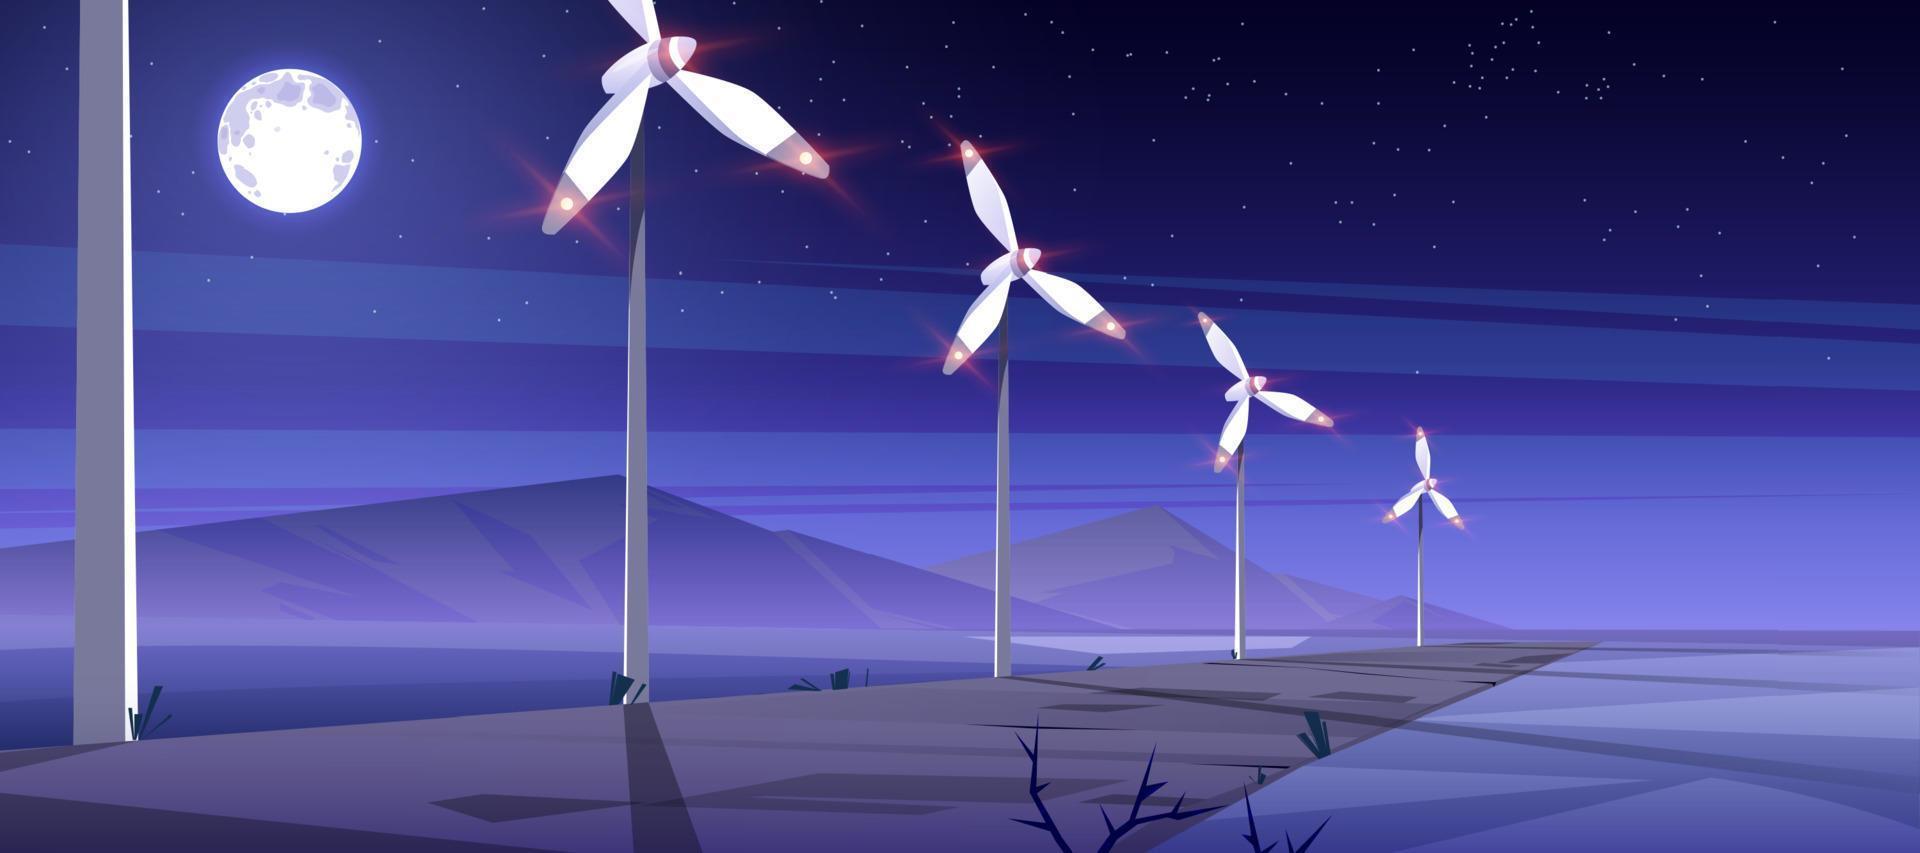 Energy farm with wind turbines at night vector